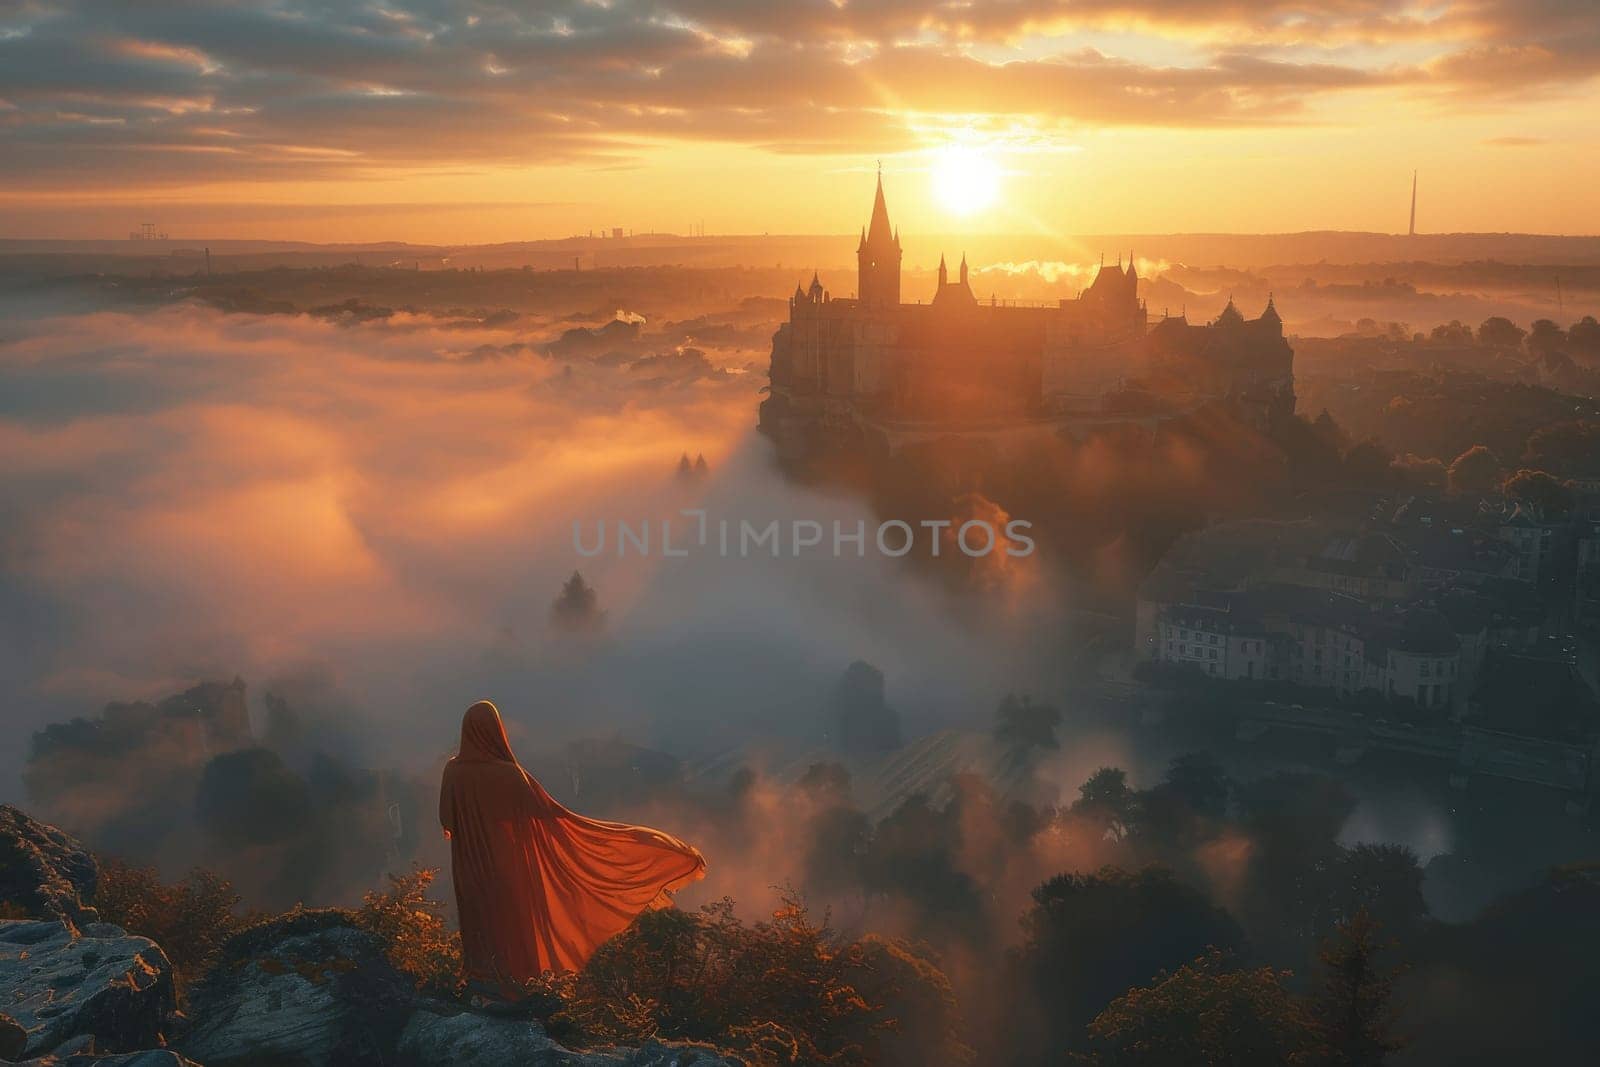 A woman stands on a hill overlooking a city with a castle in the distance by itchaznong